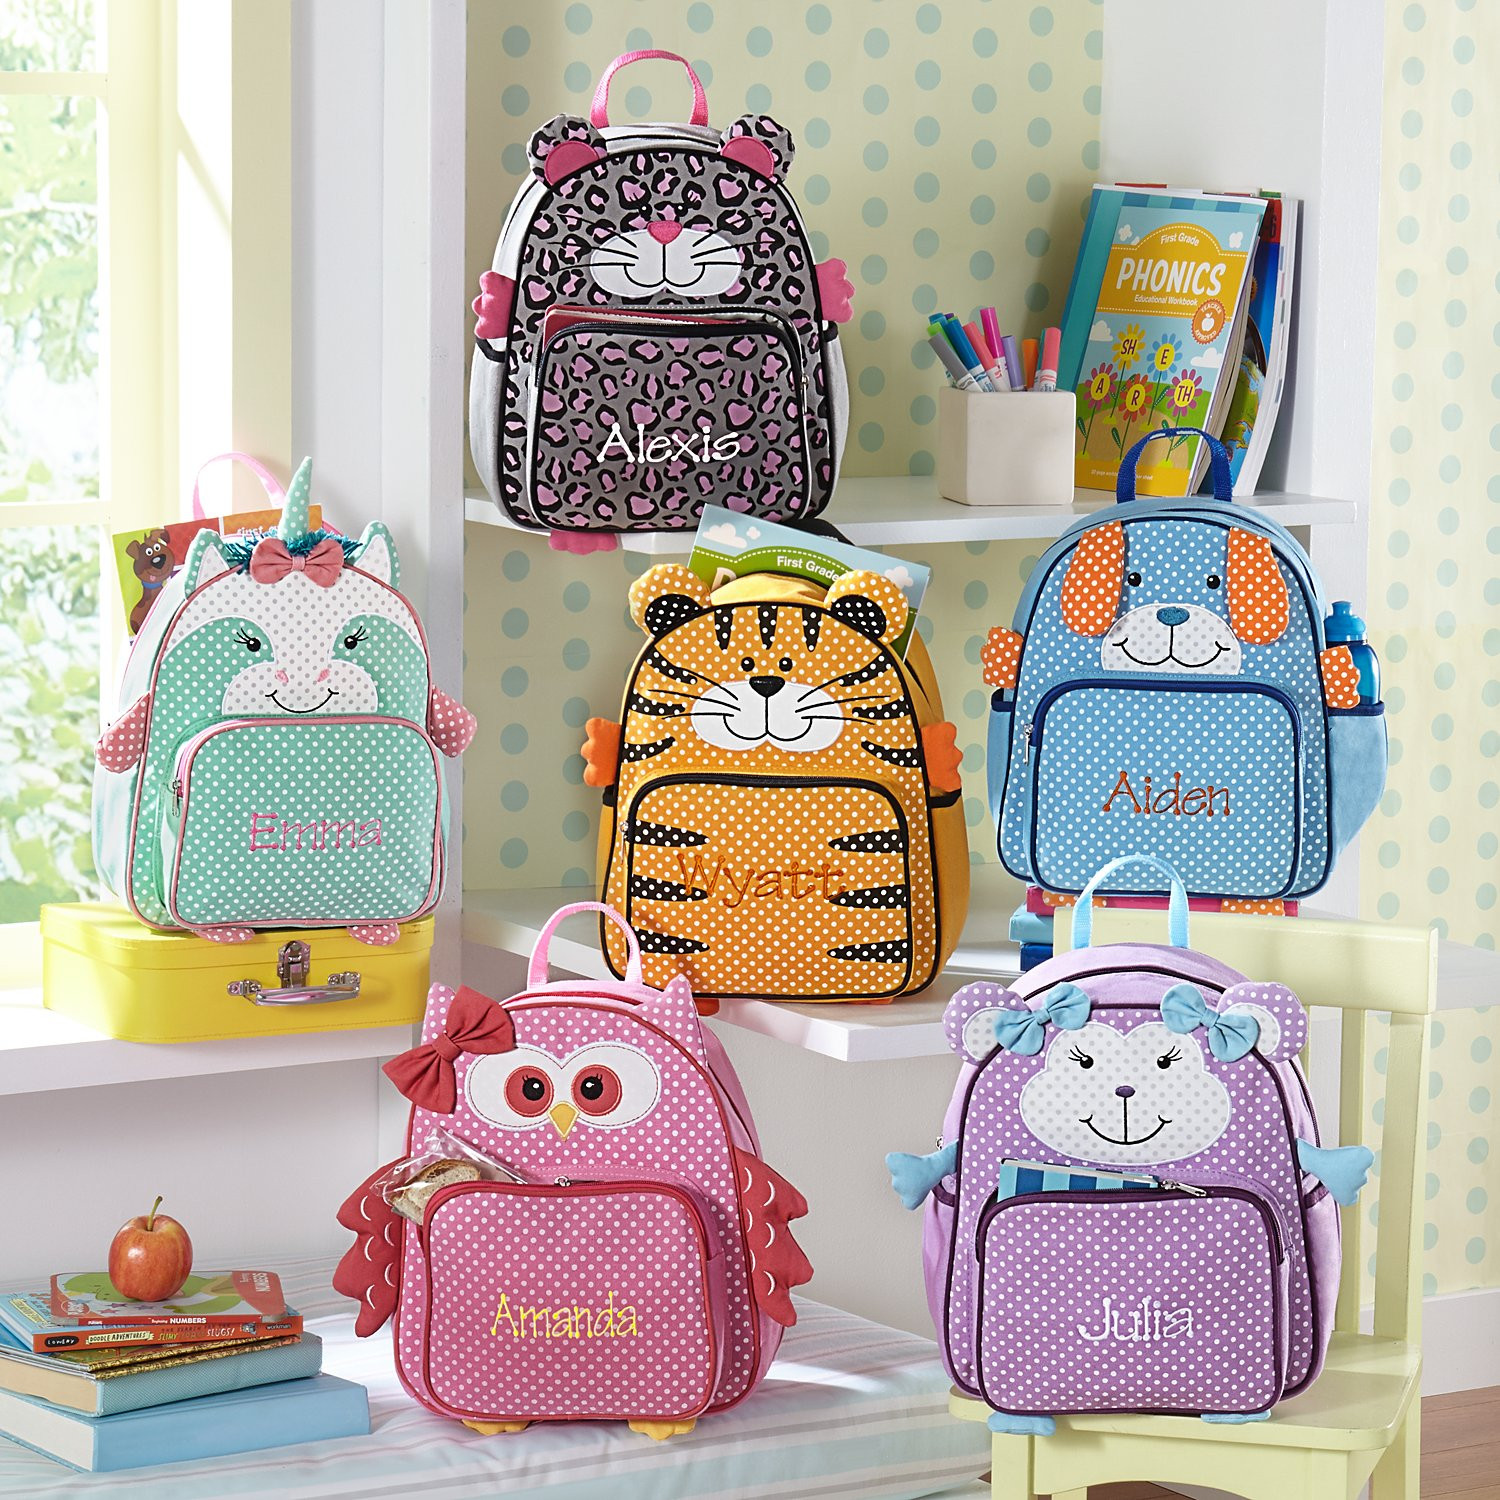 Child Birthday Gift Baskets
 Personalized Backpacks for kids and adults